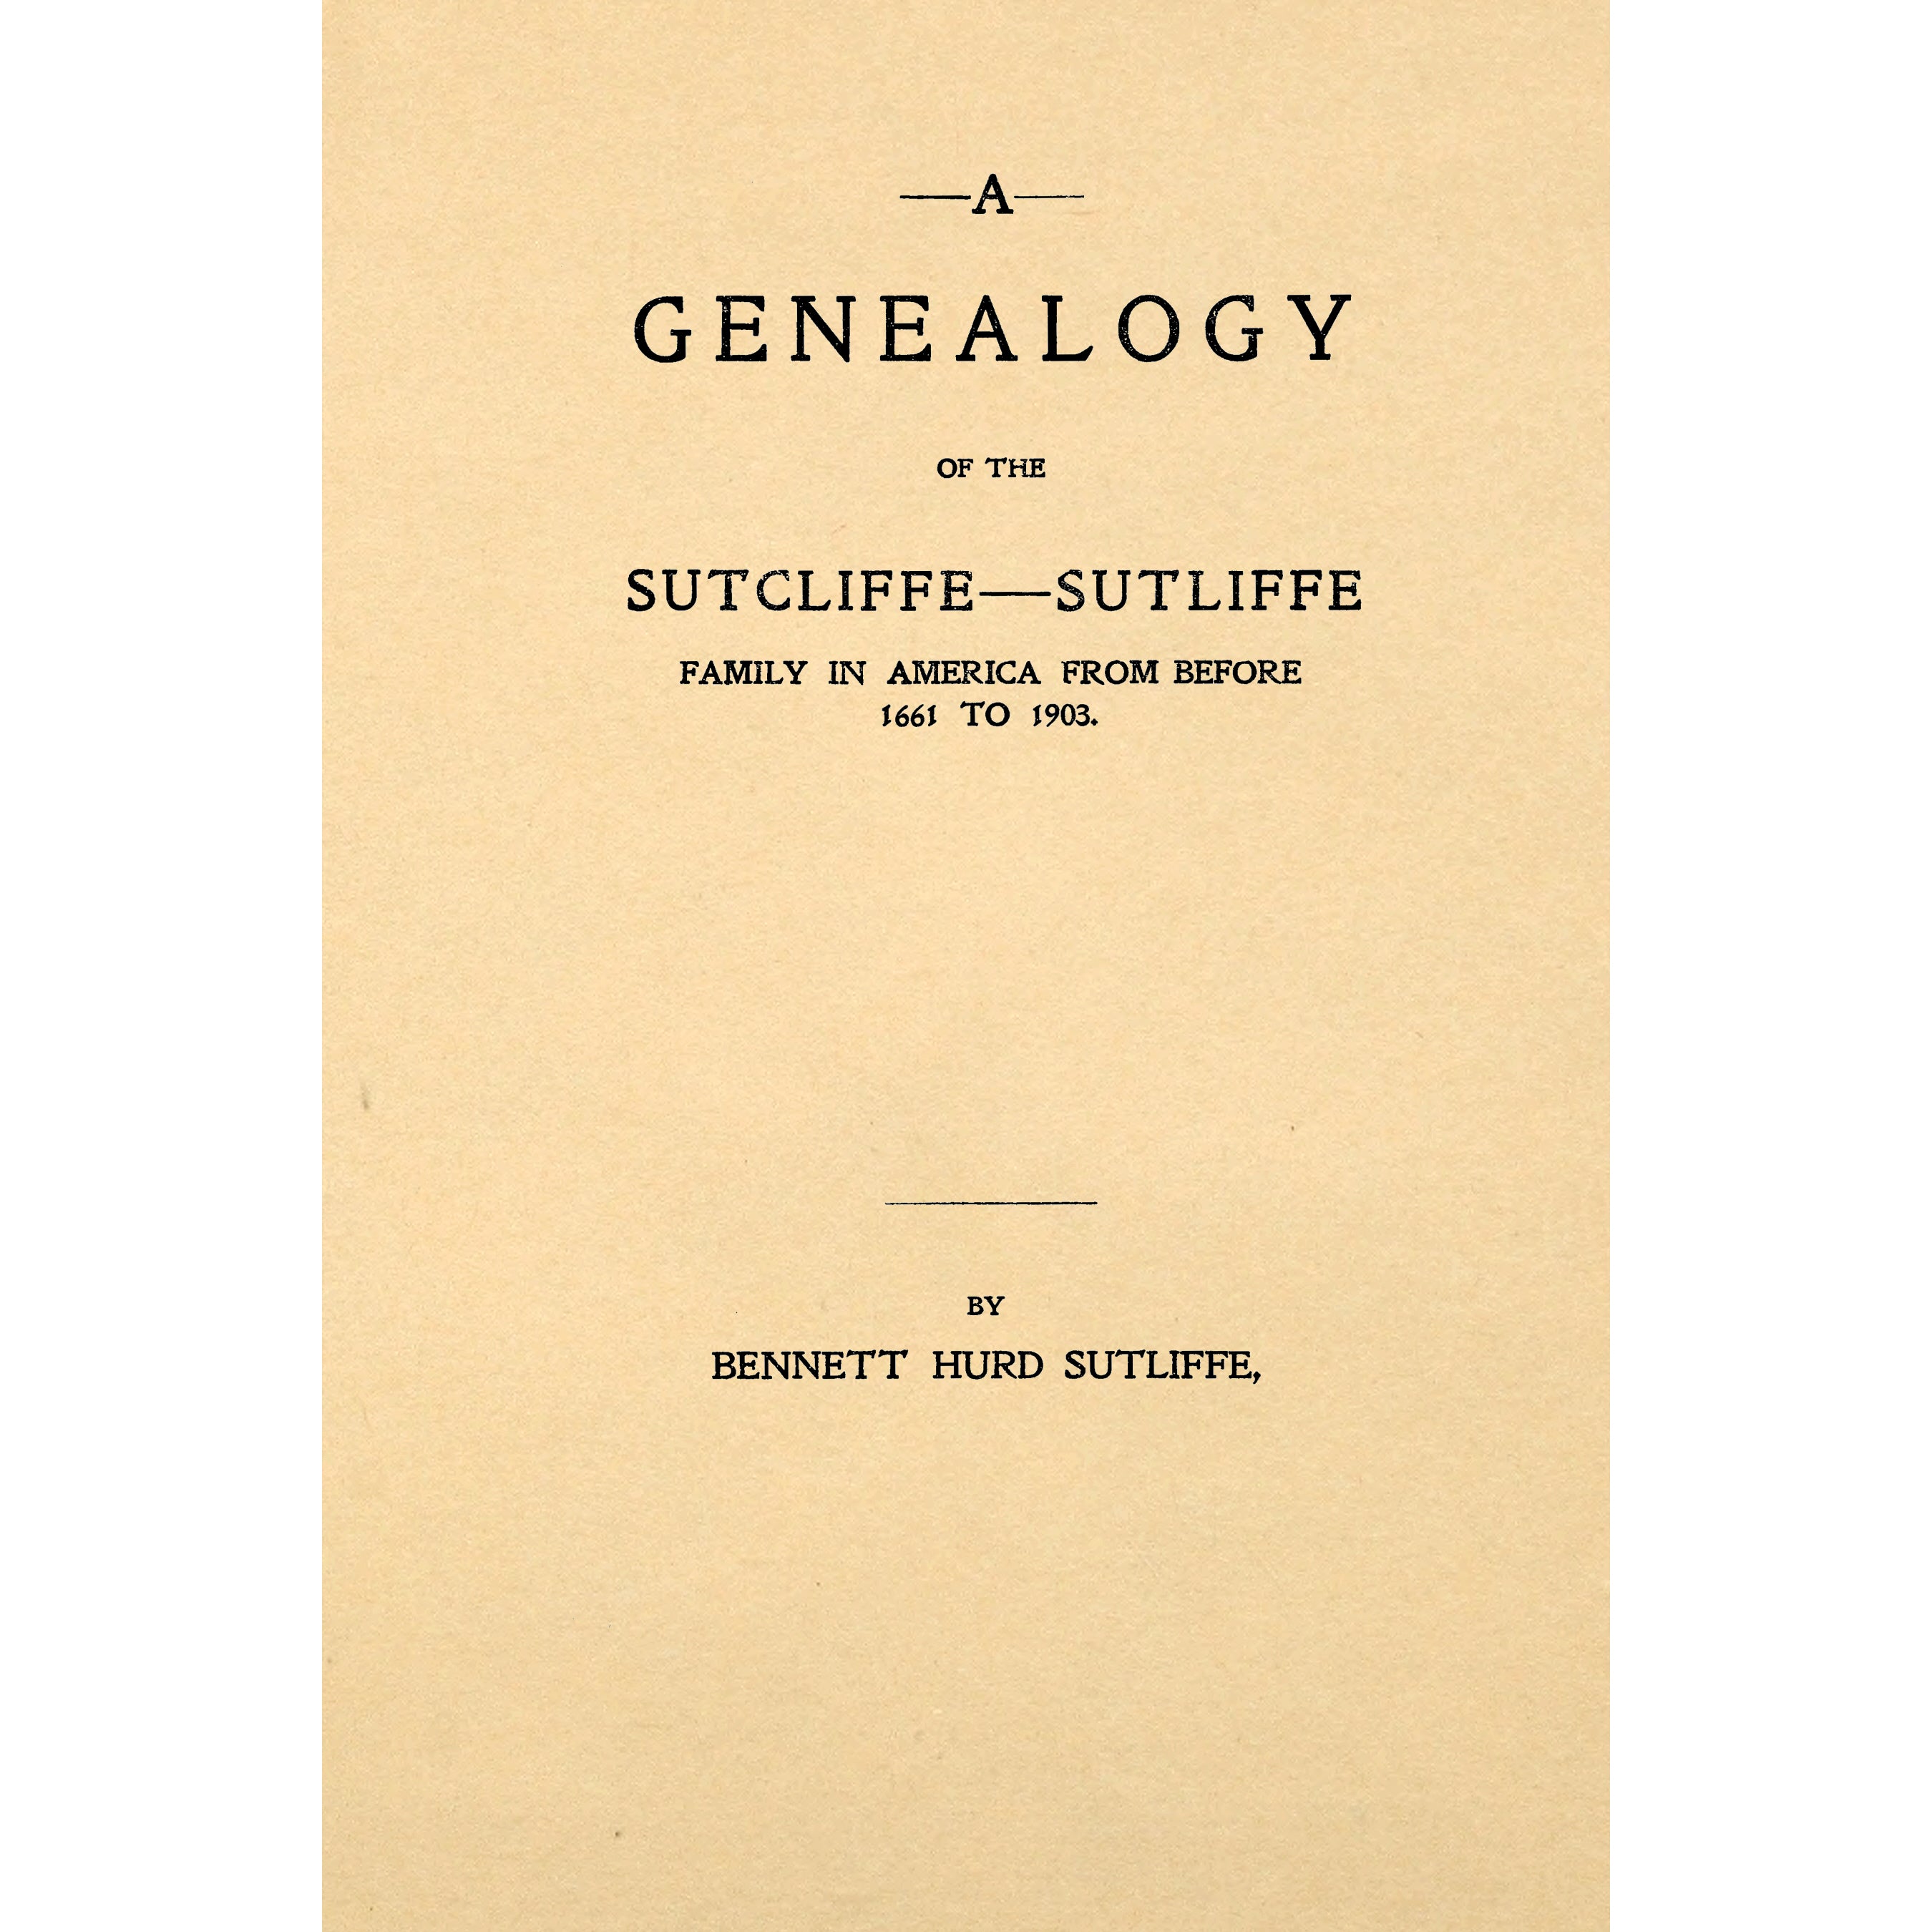 Genealogy of the Sutcliffe-Sutliffe family in America from before 1661 to 1903; the descendants of Nathaniel Sutcliffe